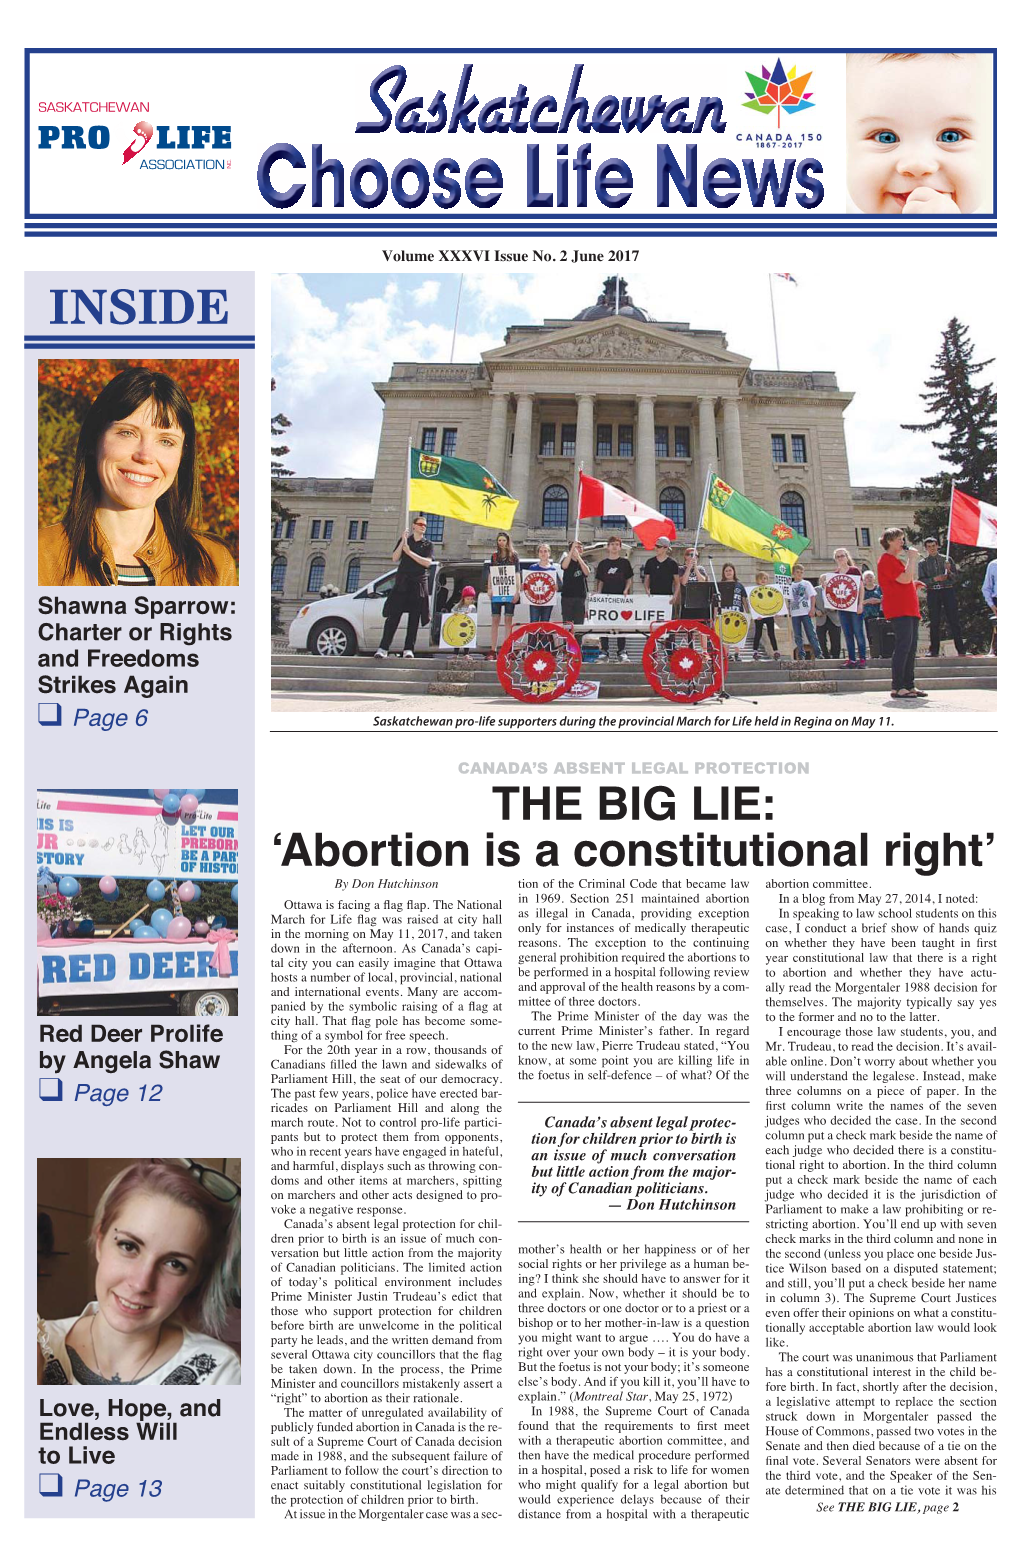 INSIDE the BIG LIE: 'Abortion Is a Constitutional Right'